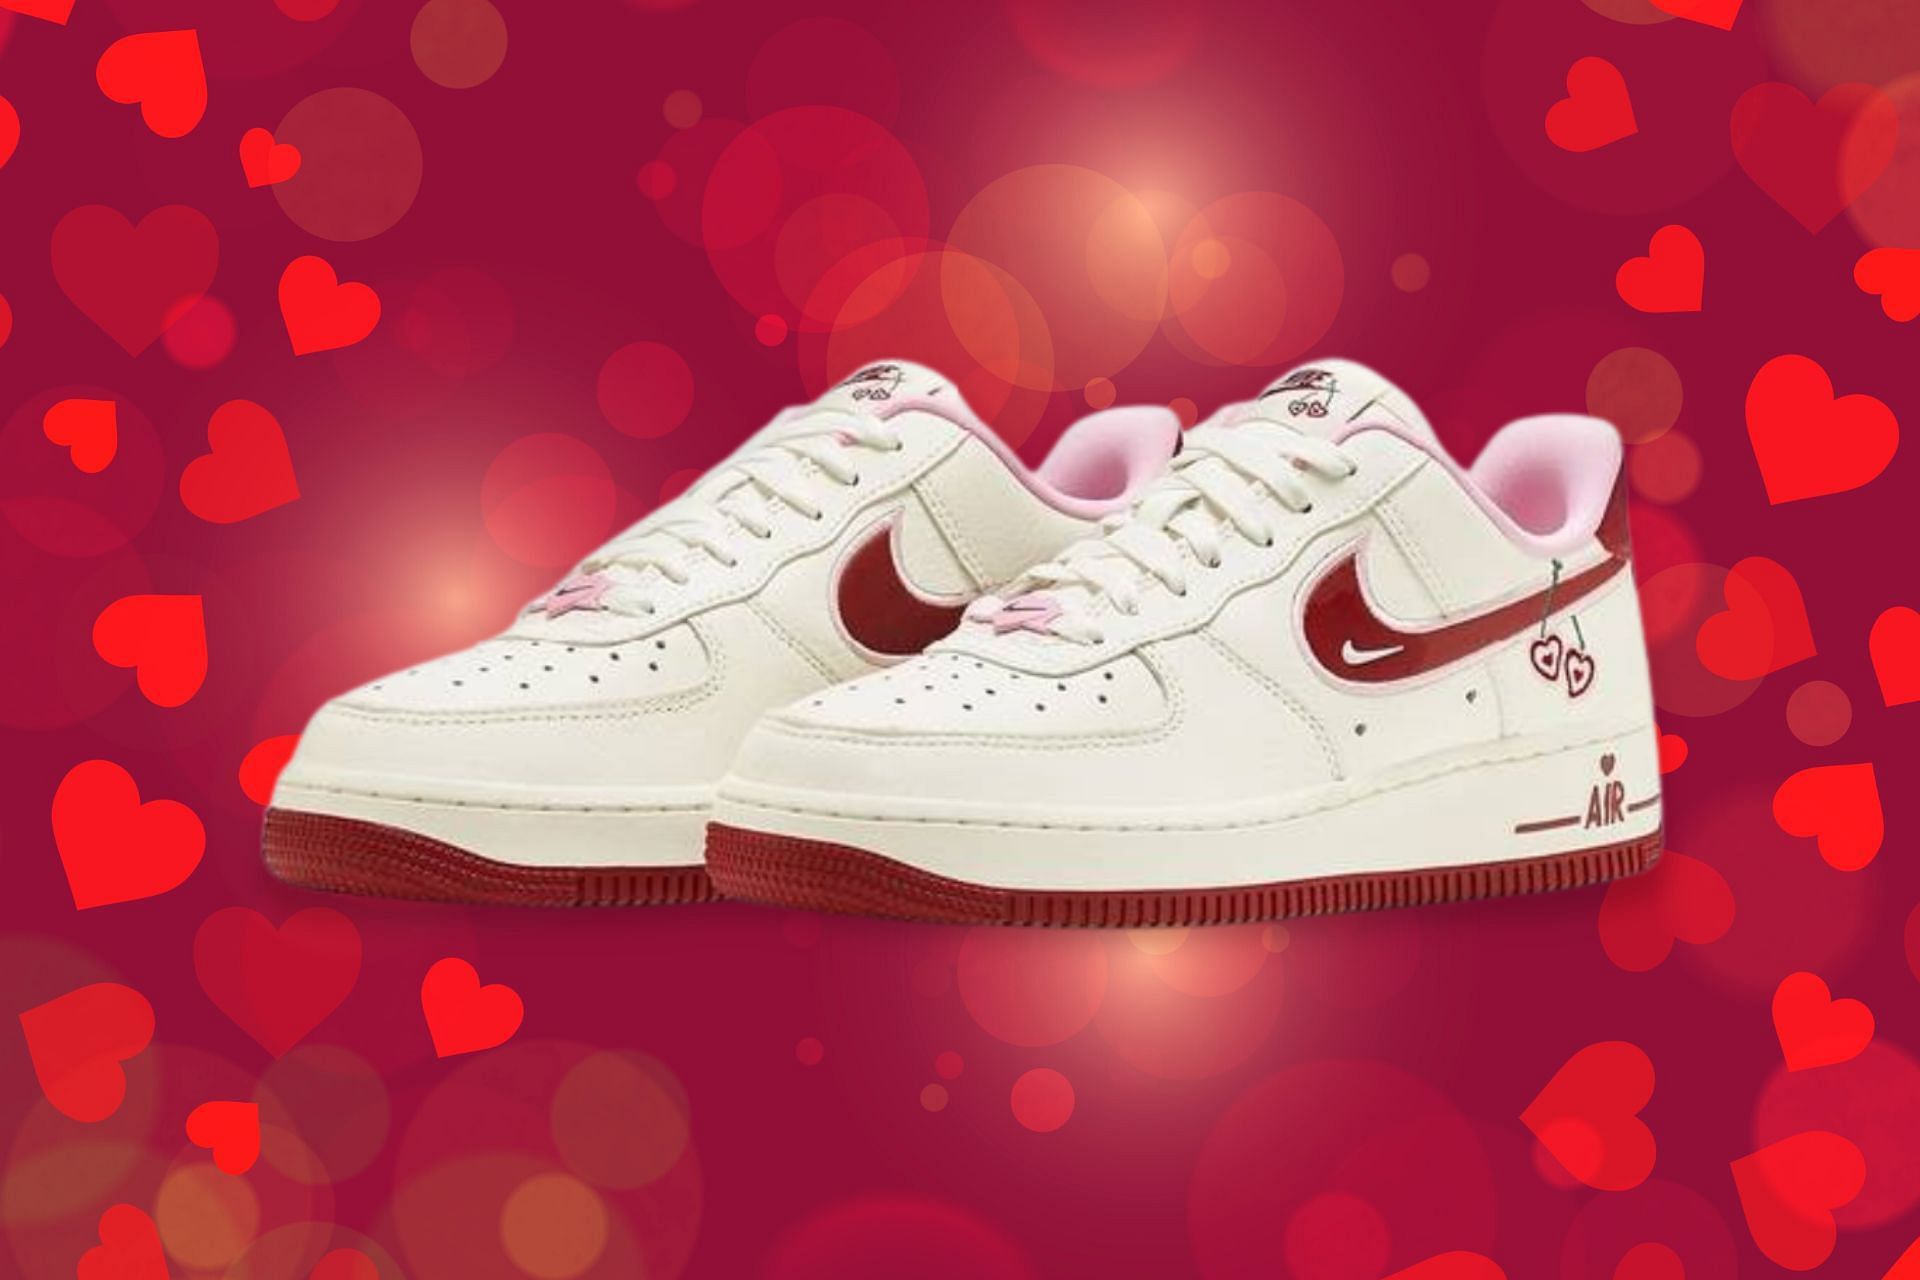 Nike Air Force 1 Low Valentines Day shoes (Image via Nike)